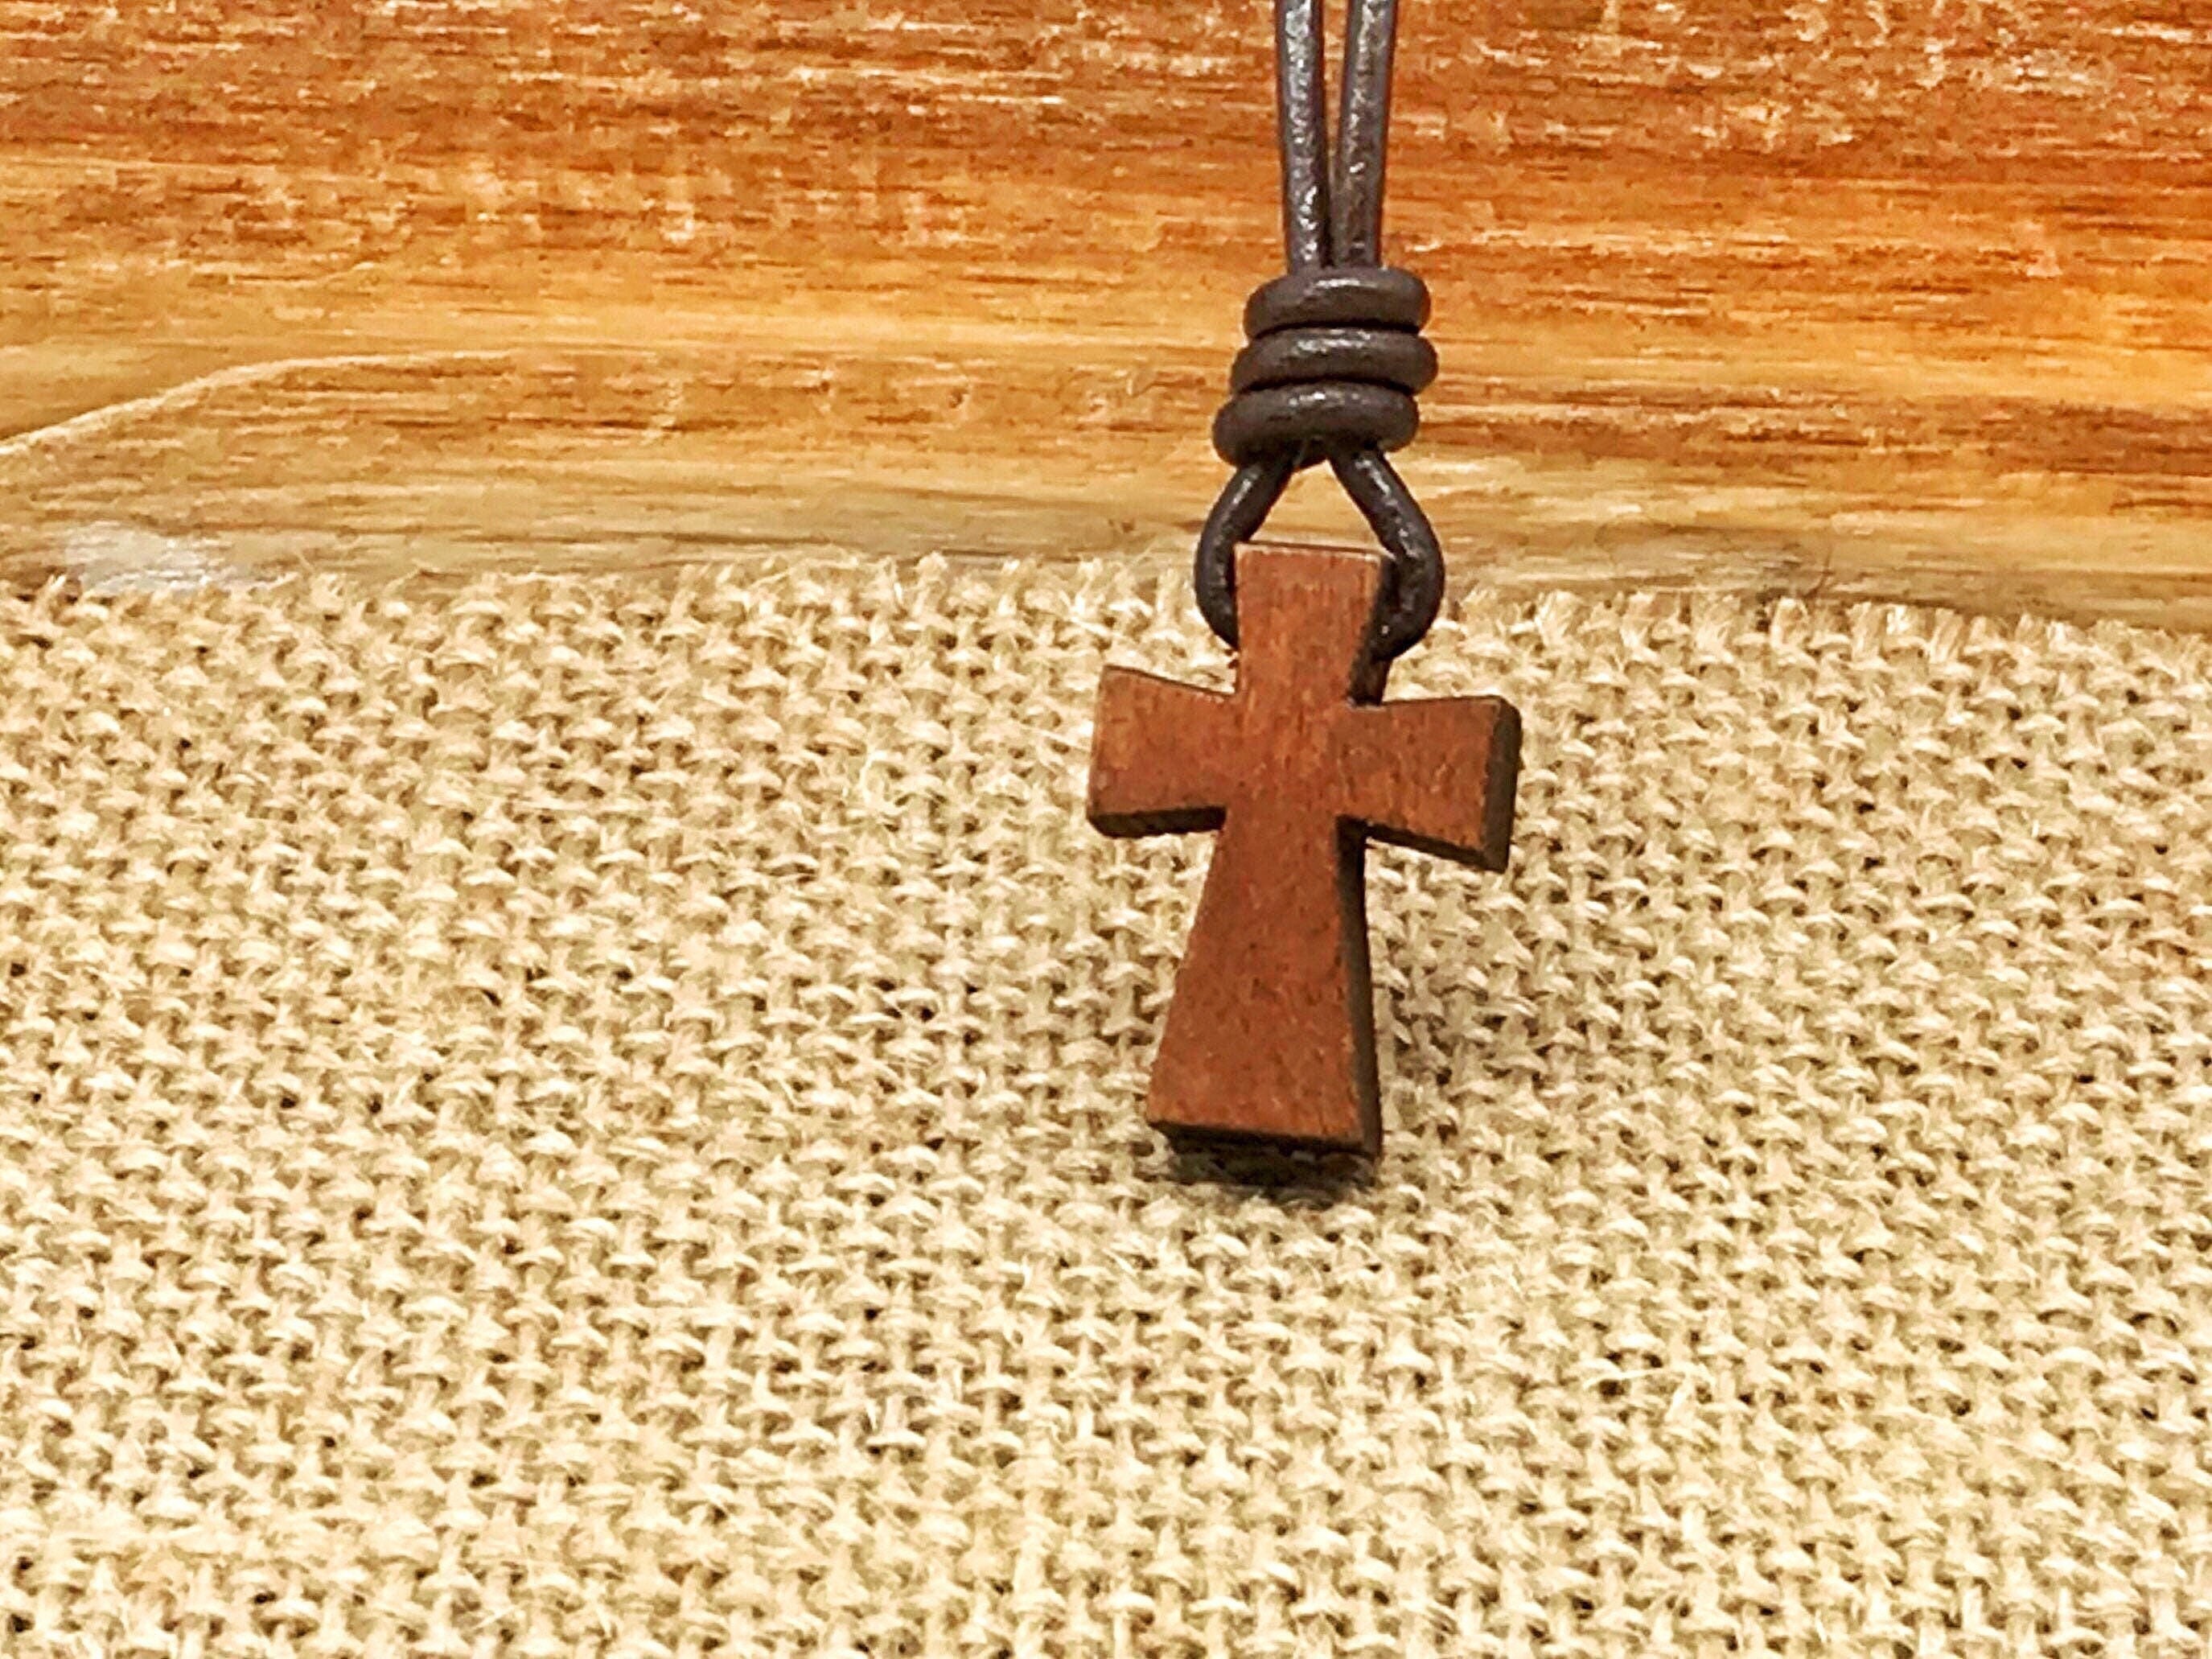 Simple Handmade Christian Wooden Cross Necklace Natural Walnut Cross Necklace for Easter, Christmas, More! Wood Cross necklace! Wood Cross